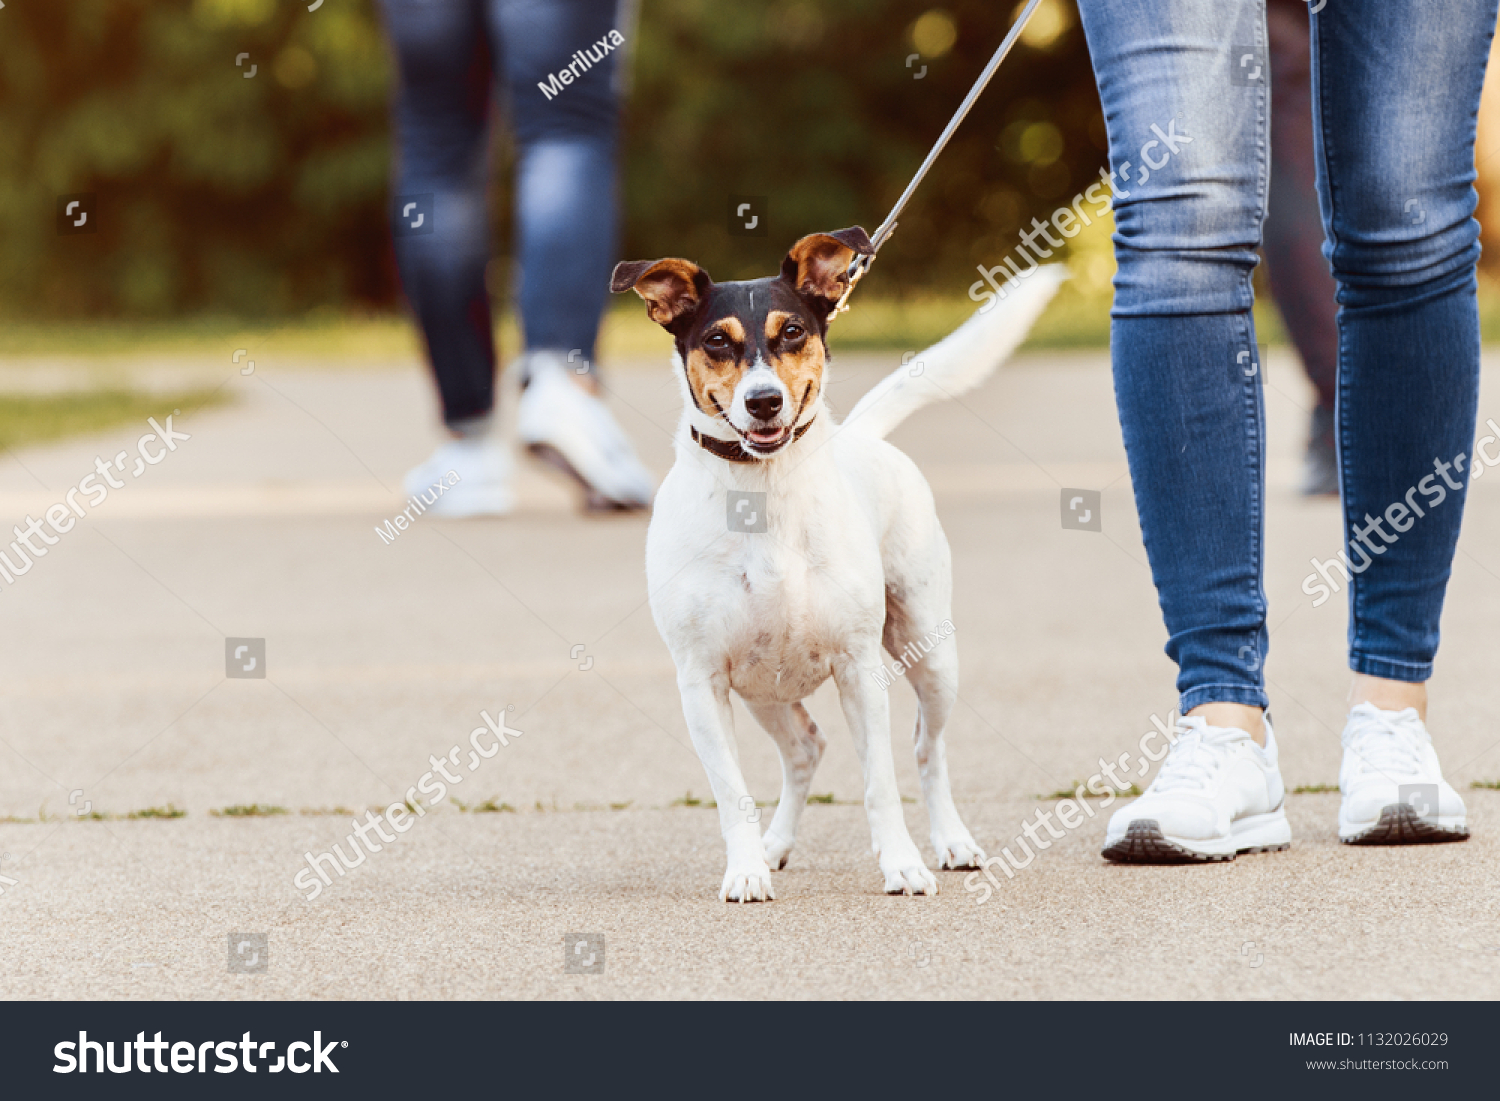 Jack Russel Terrier Running Near Her People Stock Image 1132026029